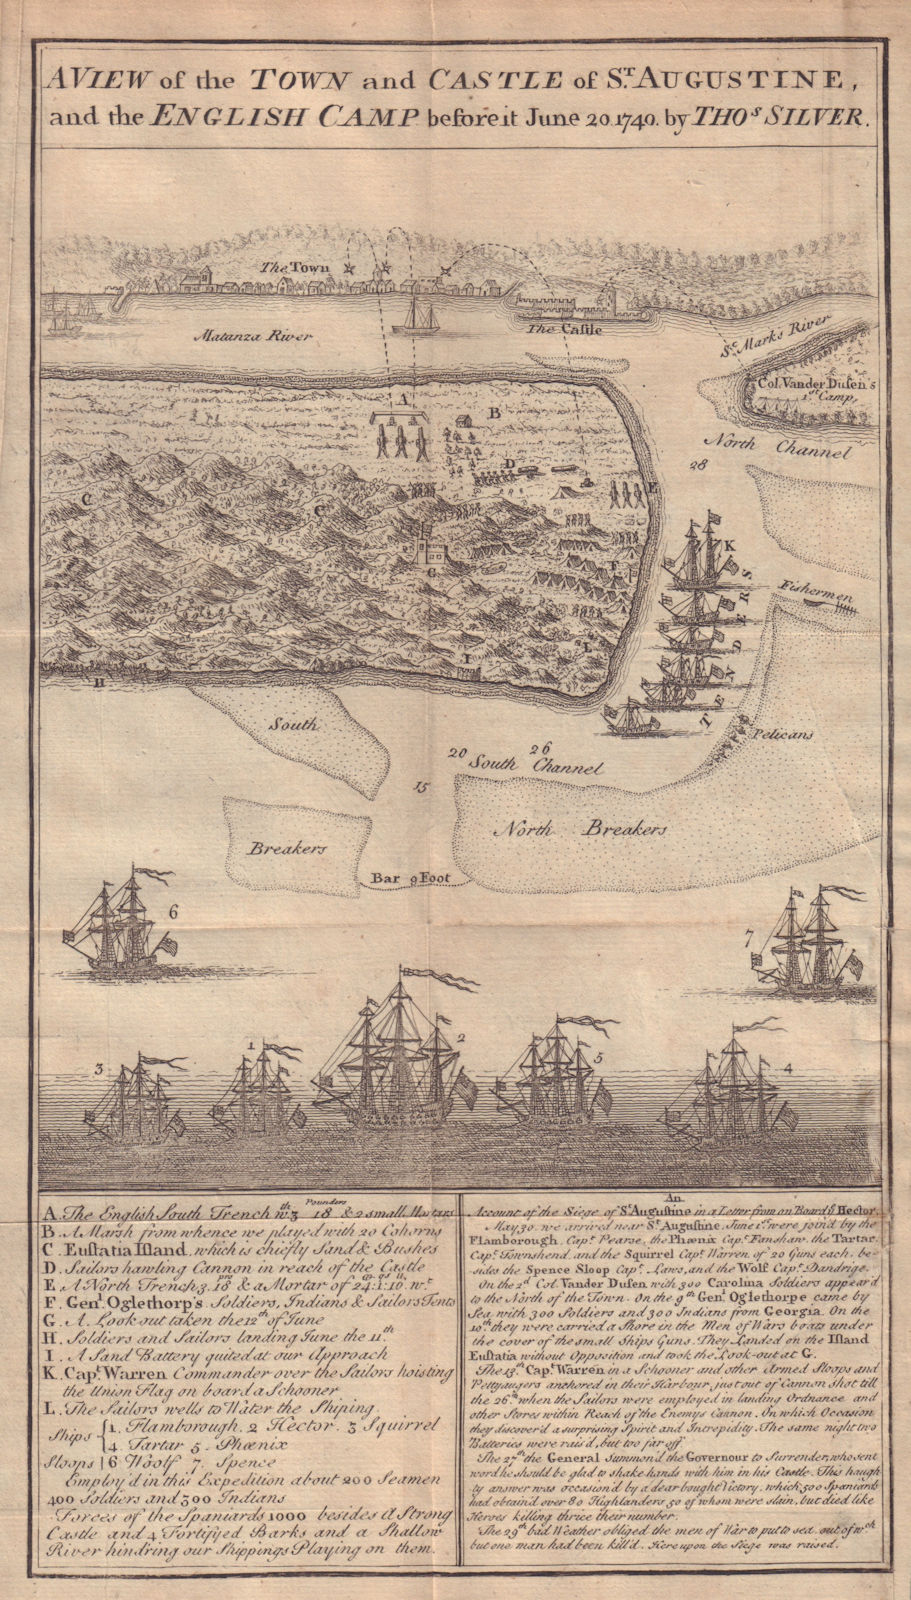 The town & castle of St. Augustine. 1740 siege. Spanish Florida. SILVER 1740 map